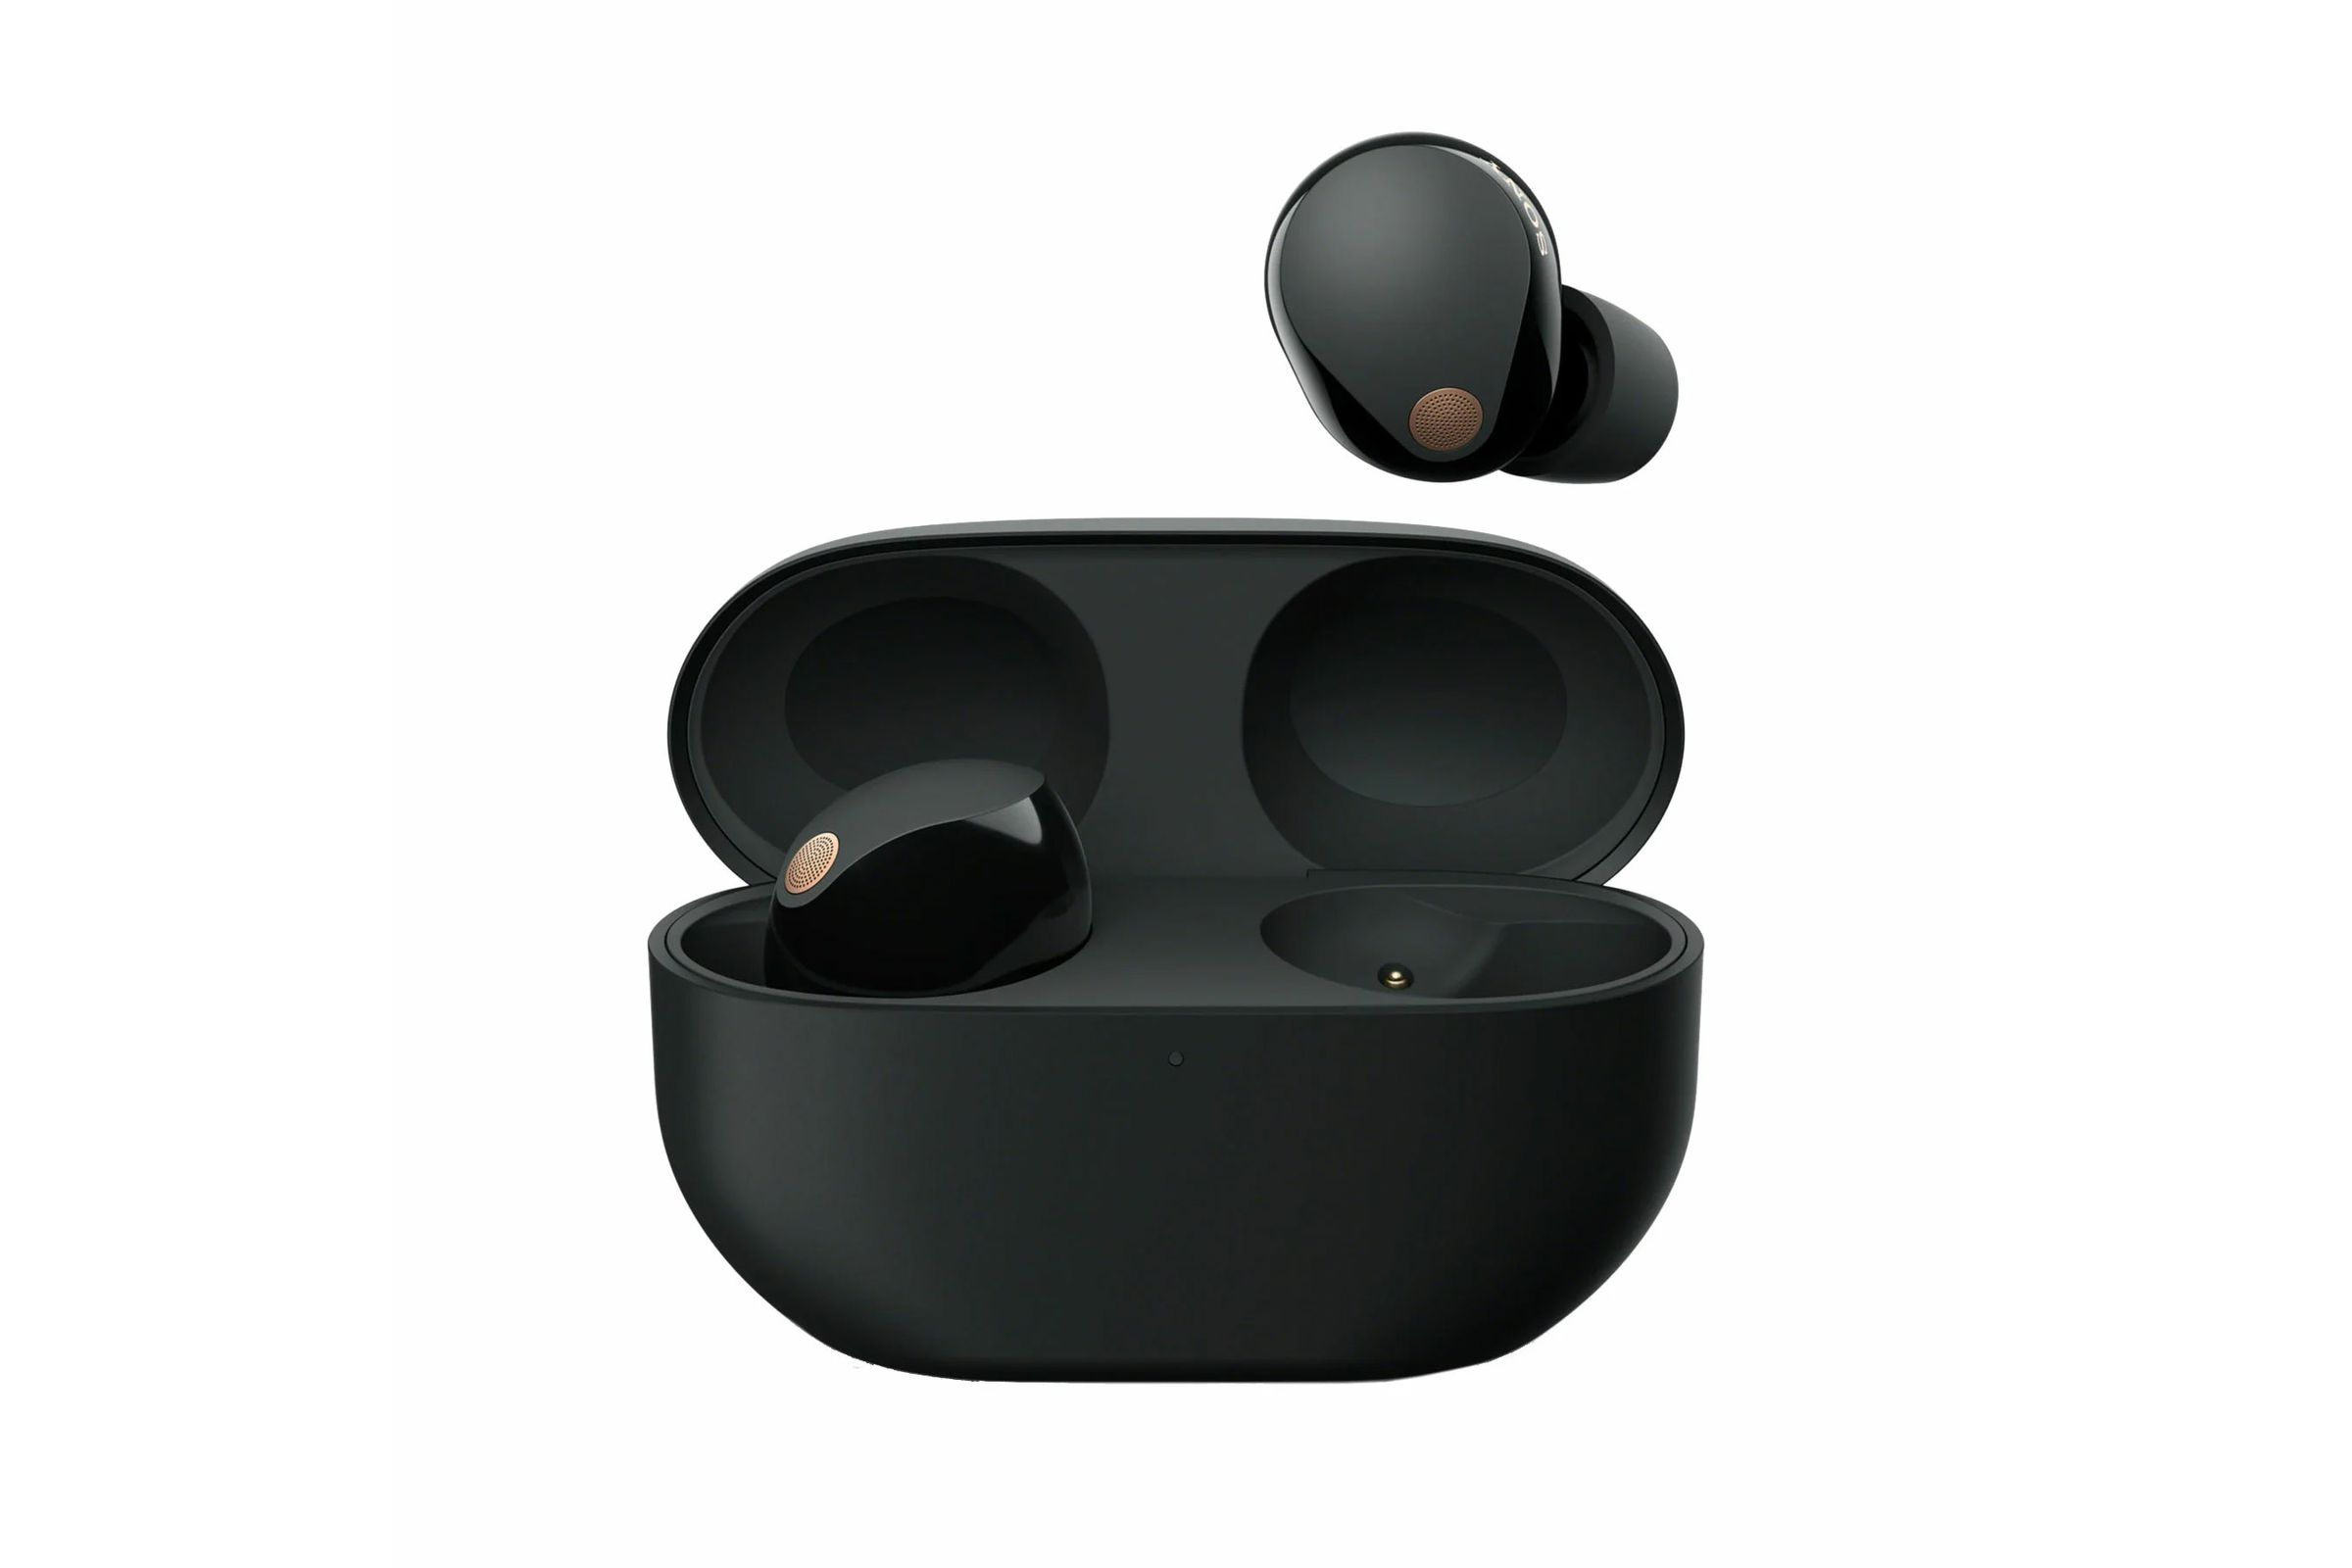 True wireless earbud charging case with one earbud removed